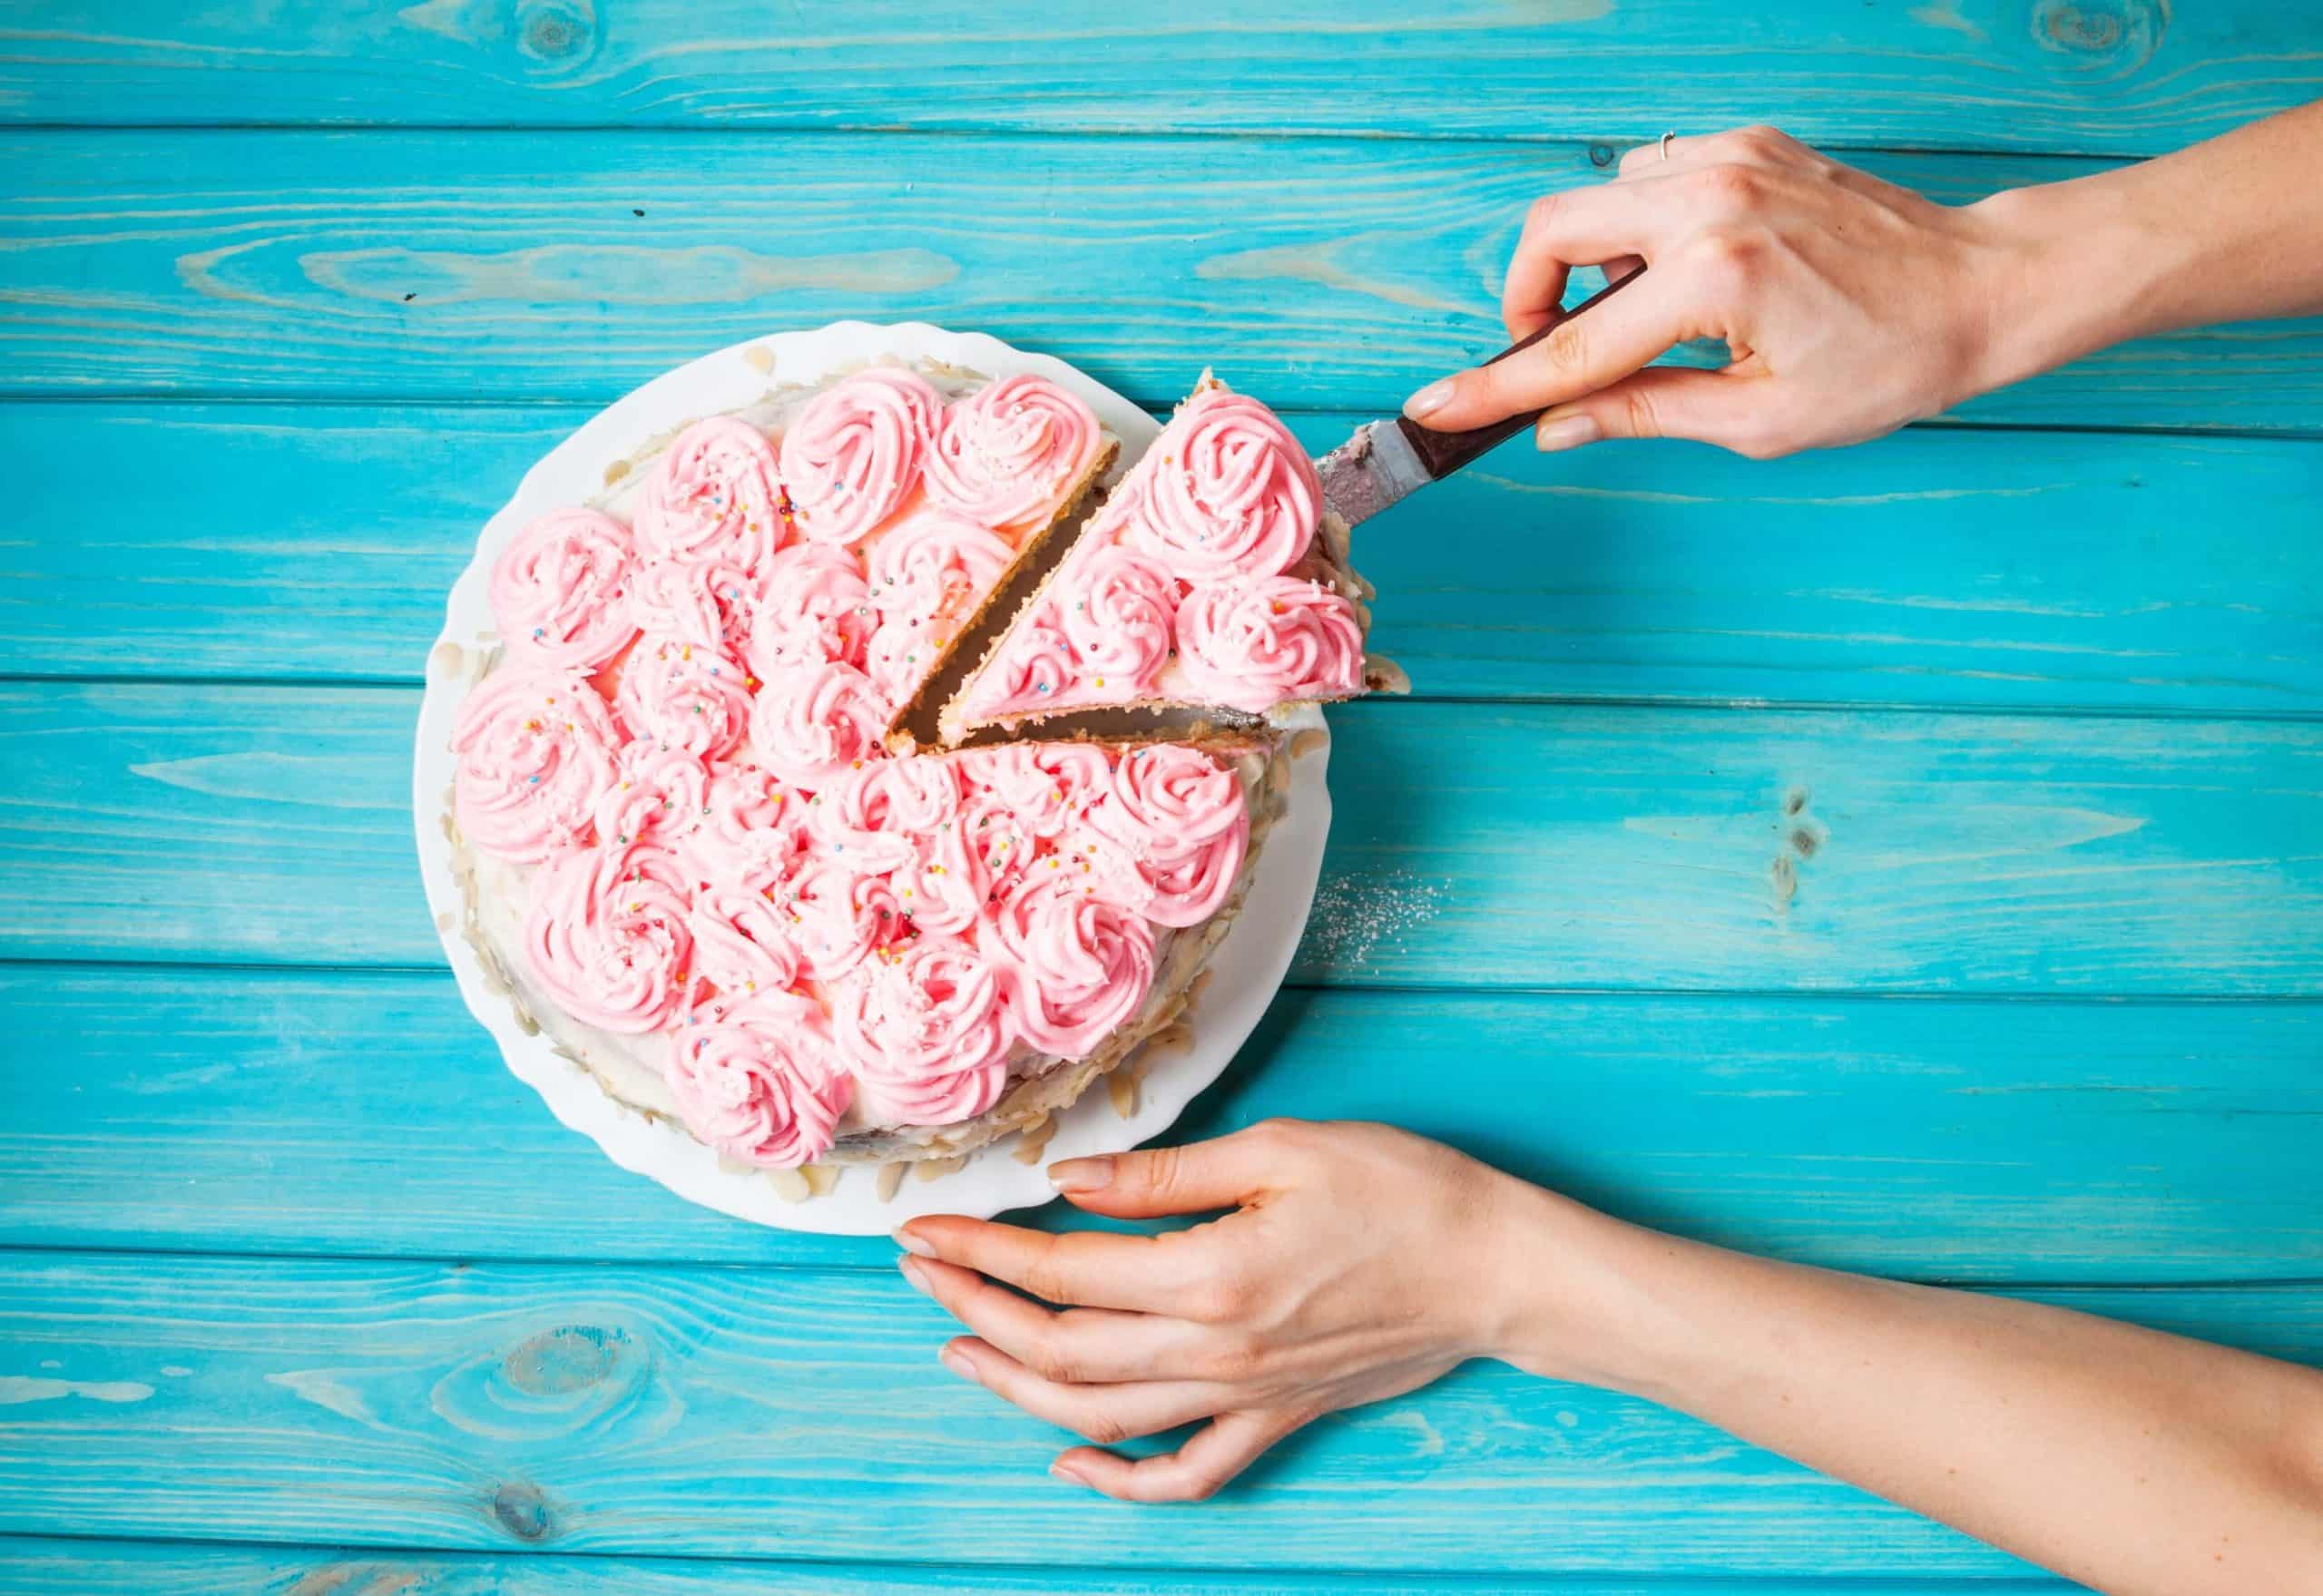 Cake Troubleshooting Guide: Cake Baking Problems and Solutions